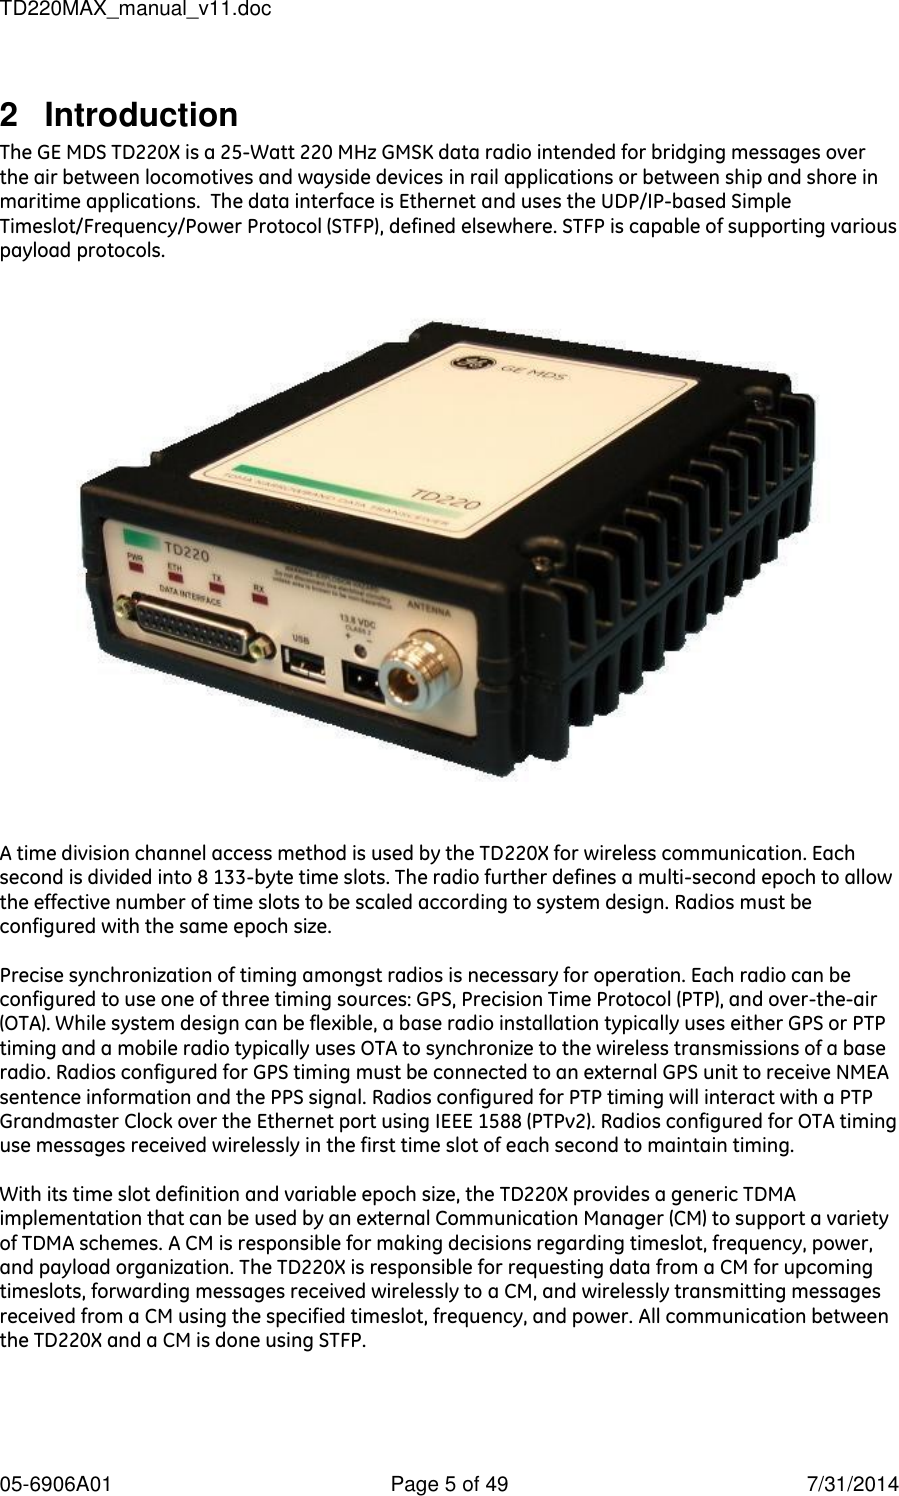 TD220MAX_manual_v11.doc 05-6906A01  Page 5 of 49  7/31/2014 2  Introduction The GE MDS TD220X is a 25-Watt 220 MHz GMSK data radio intended for bridging messages over the air between locomotives and wayside devices in rail applications or between ship and shore in maritime applications.  The data interface is Ethernet and uses the UDP/IP-based Simple Timeslot/Frequency/Power Protocol (STFP), defined elsewhere. STFP is capable of supporting various payload protocols.    A time division channel access method is used by the TD220X for wireless communication. Each second is divided into 8 133-byte time slots. The radio further defines a multi-second epoch to allow the effective number of time slots to be scaled according to system design. Radios must be configured with the same epoch size.   Precise synchronization of timing amongst radios is necessary for operation. Each radio can be configured to use one of three timing sources: GPS, Precision Time Protocol (PTP), and over-the-air (OTA). While system design can be flexible, a base radio installation typically uses either GPS or PTP timing and a mobile radio typically uses OTA to synchronize to the wireless transmissions of a base radio. Radios configured for GPS timing must be connected to an external GPS unit to receive NMEA sentence information and the PPS signal. Radios configured for PTP timing will interact with a PTP Grandmaster Clock over the Ethernet port using IEEE 1588 (PTPv2). Radios configured for OTA timing use messages received wirelessly in the first time slot of each second to maintain timing.  With its time slot definition and variable epoch size, the TD220X provides a generic TDMA implementation that can be used by an external Communication Manager (CM) to support a variety of TDMA schemes. A CM is responsible for making decisions regarding timeslot, frequency, power, and payload organization. The TD220X is responsible for requesting data from a CM for upcoming timeslots, forwarding messages received wirelessly to a CM, and wirelessly transmitting messages received from a CM using the specified timeslot, frequency, and power. All communication between the TD220X and a CM is done using STFP.   